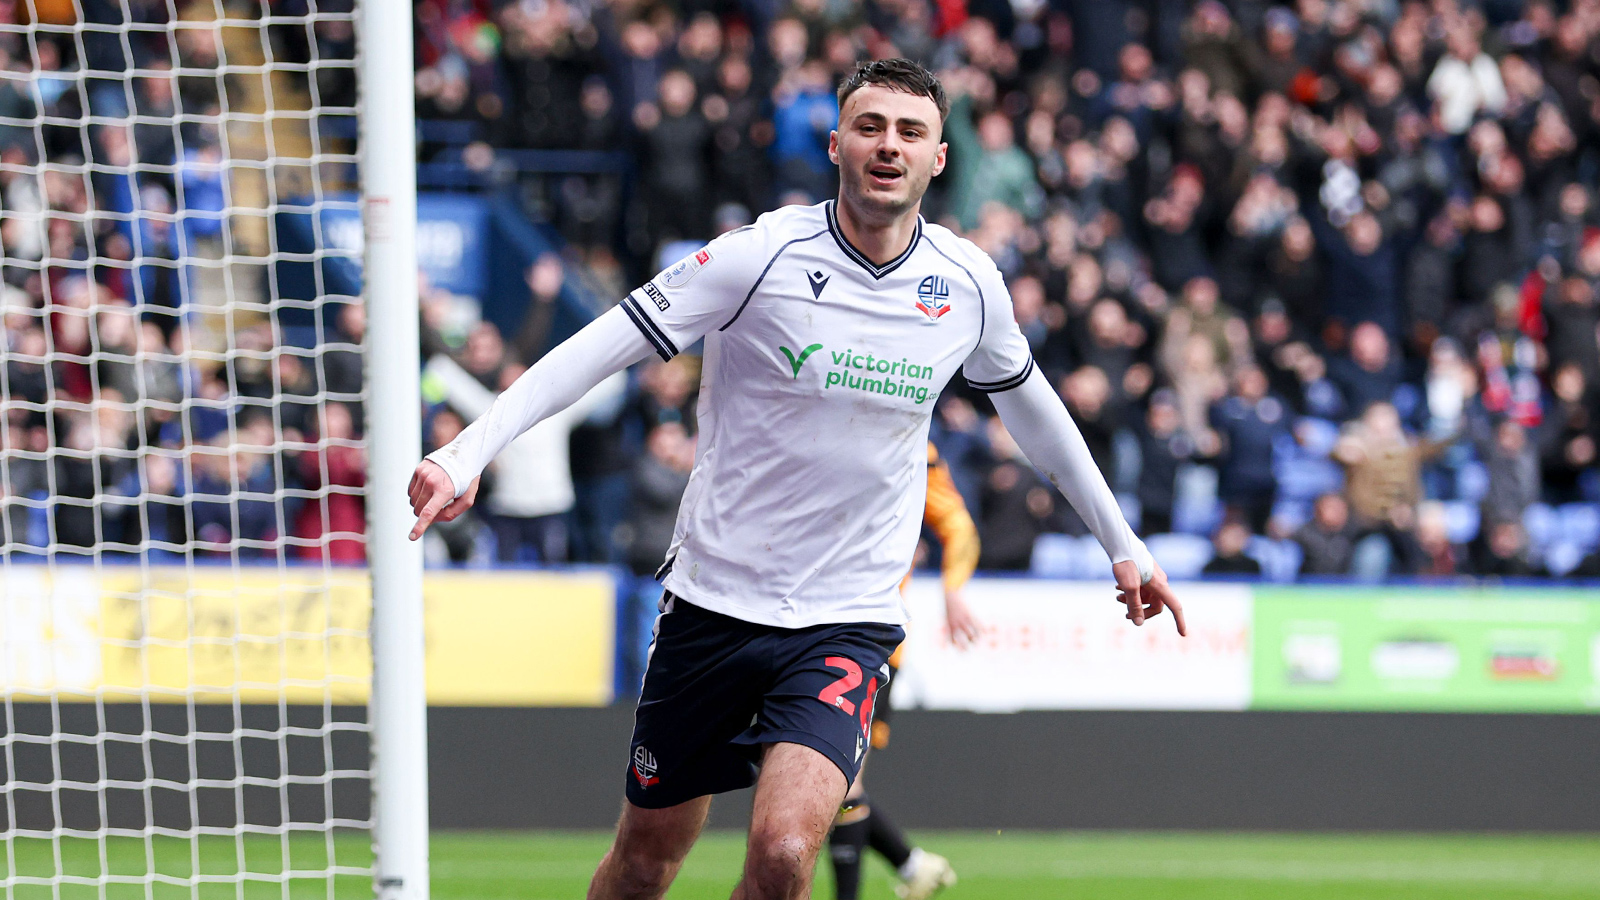 Aaron Collins celebrates scoring against Bolton Wanderers